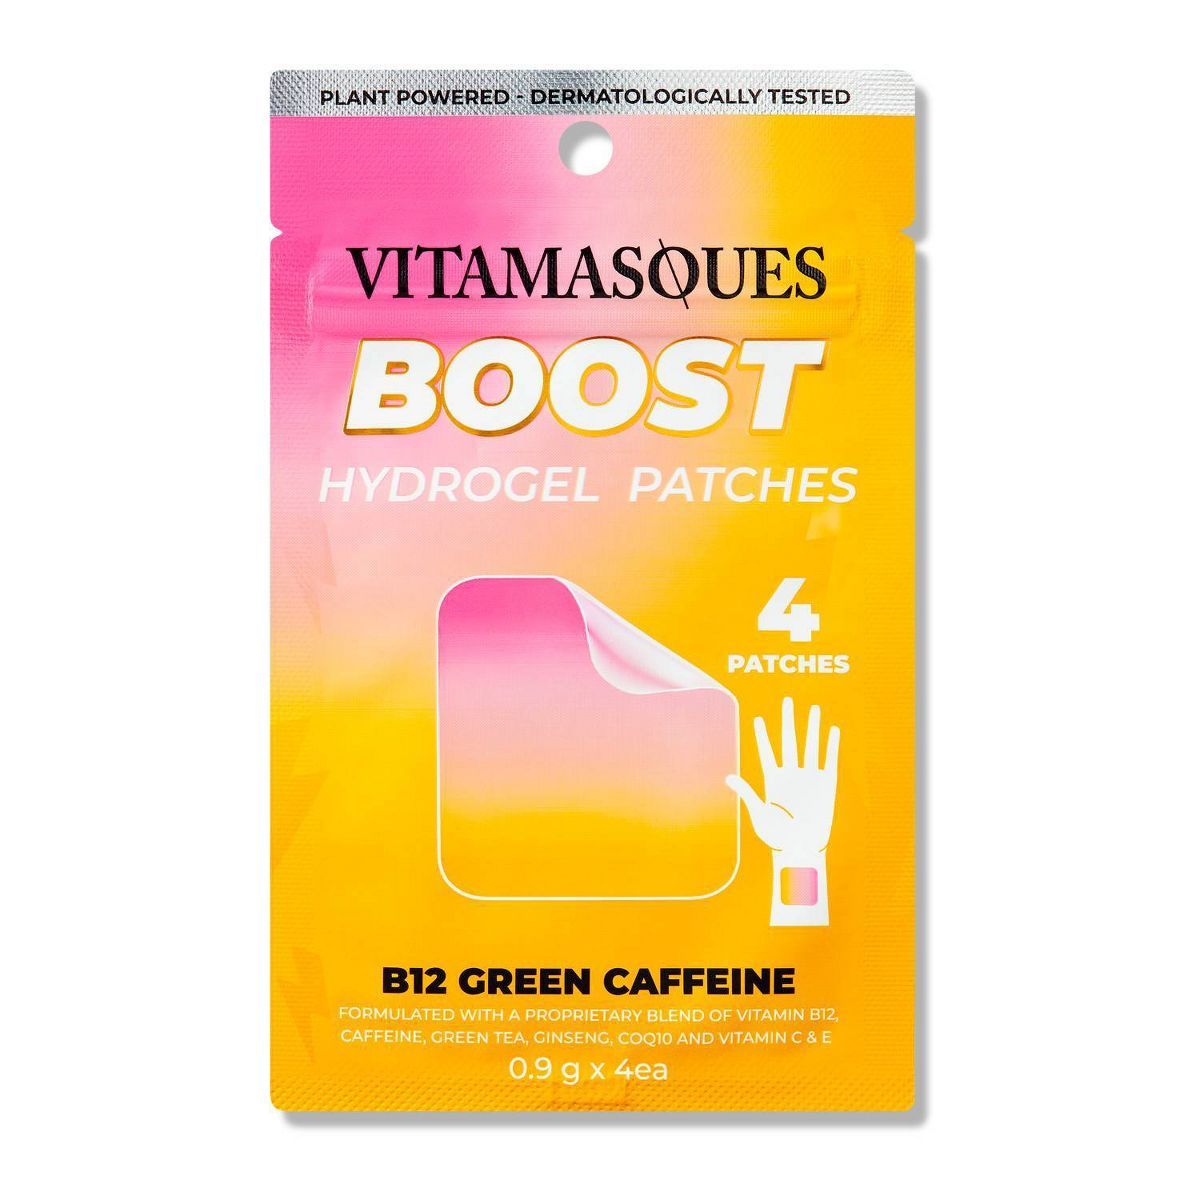 Vitamasques BOOST B12+Green Caffeine Vitamin Hydrogel Face Patches - 4pk | Target